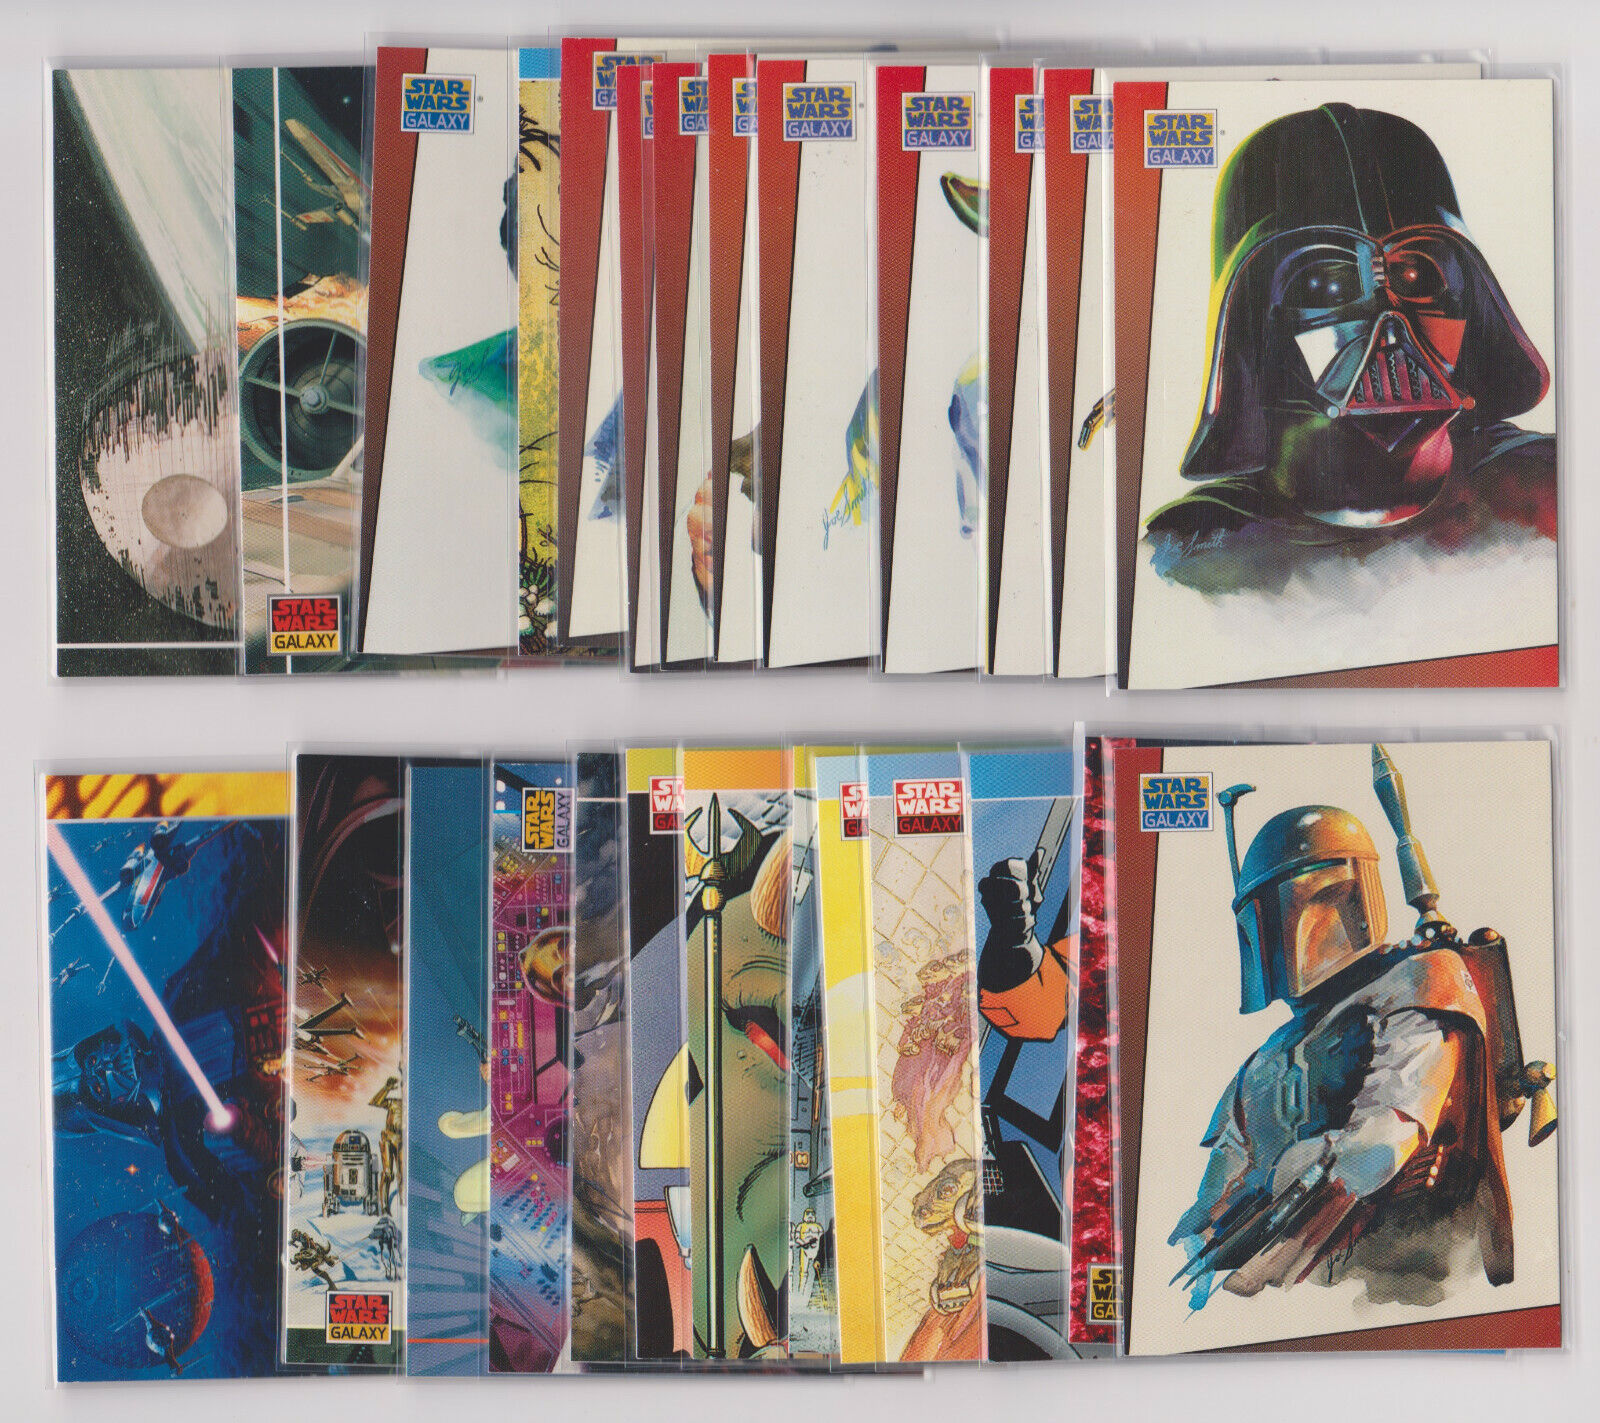 COMPLETE 28 CARD SET - 1993 Topps Star Wars Galaxy Bend Ems Cards #A-BB RARE